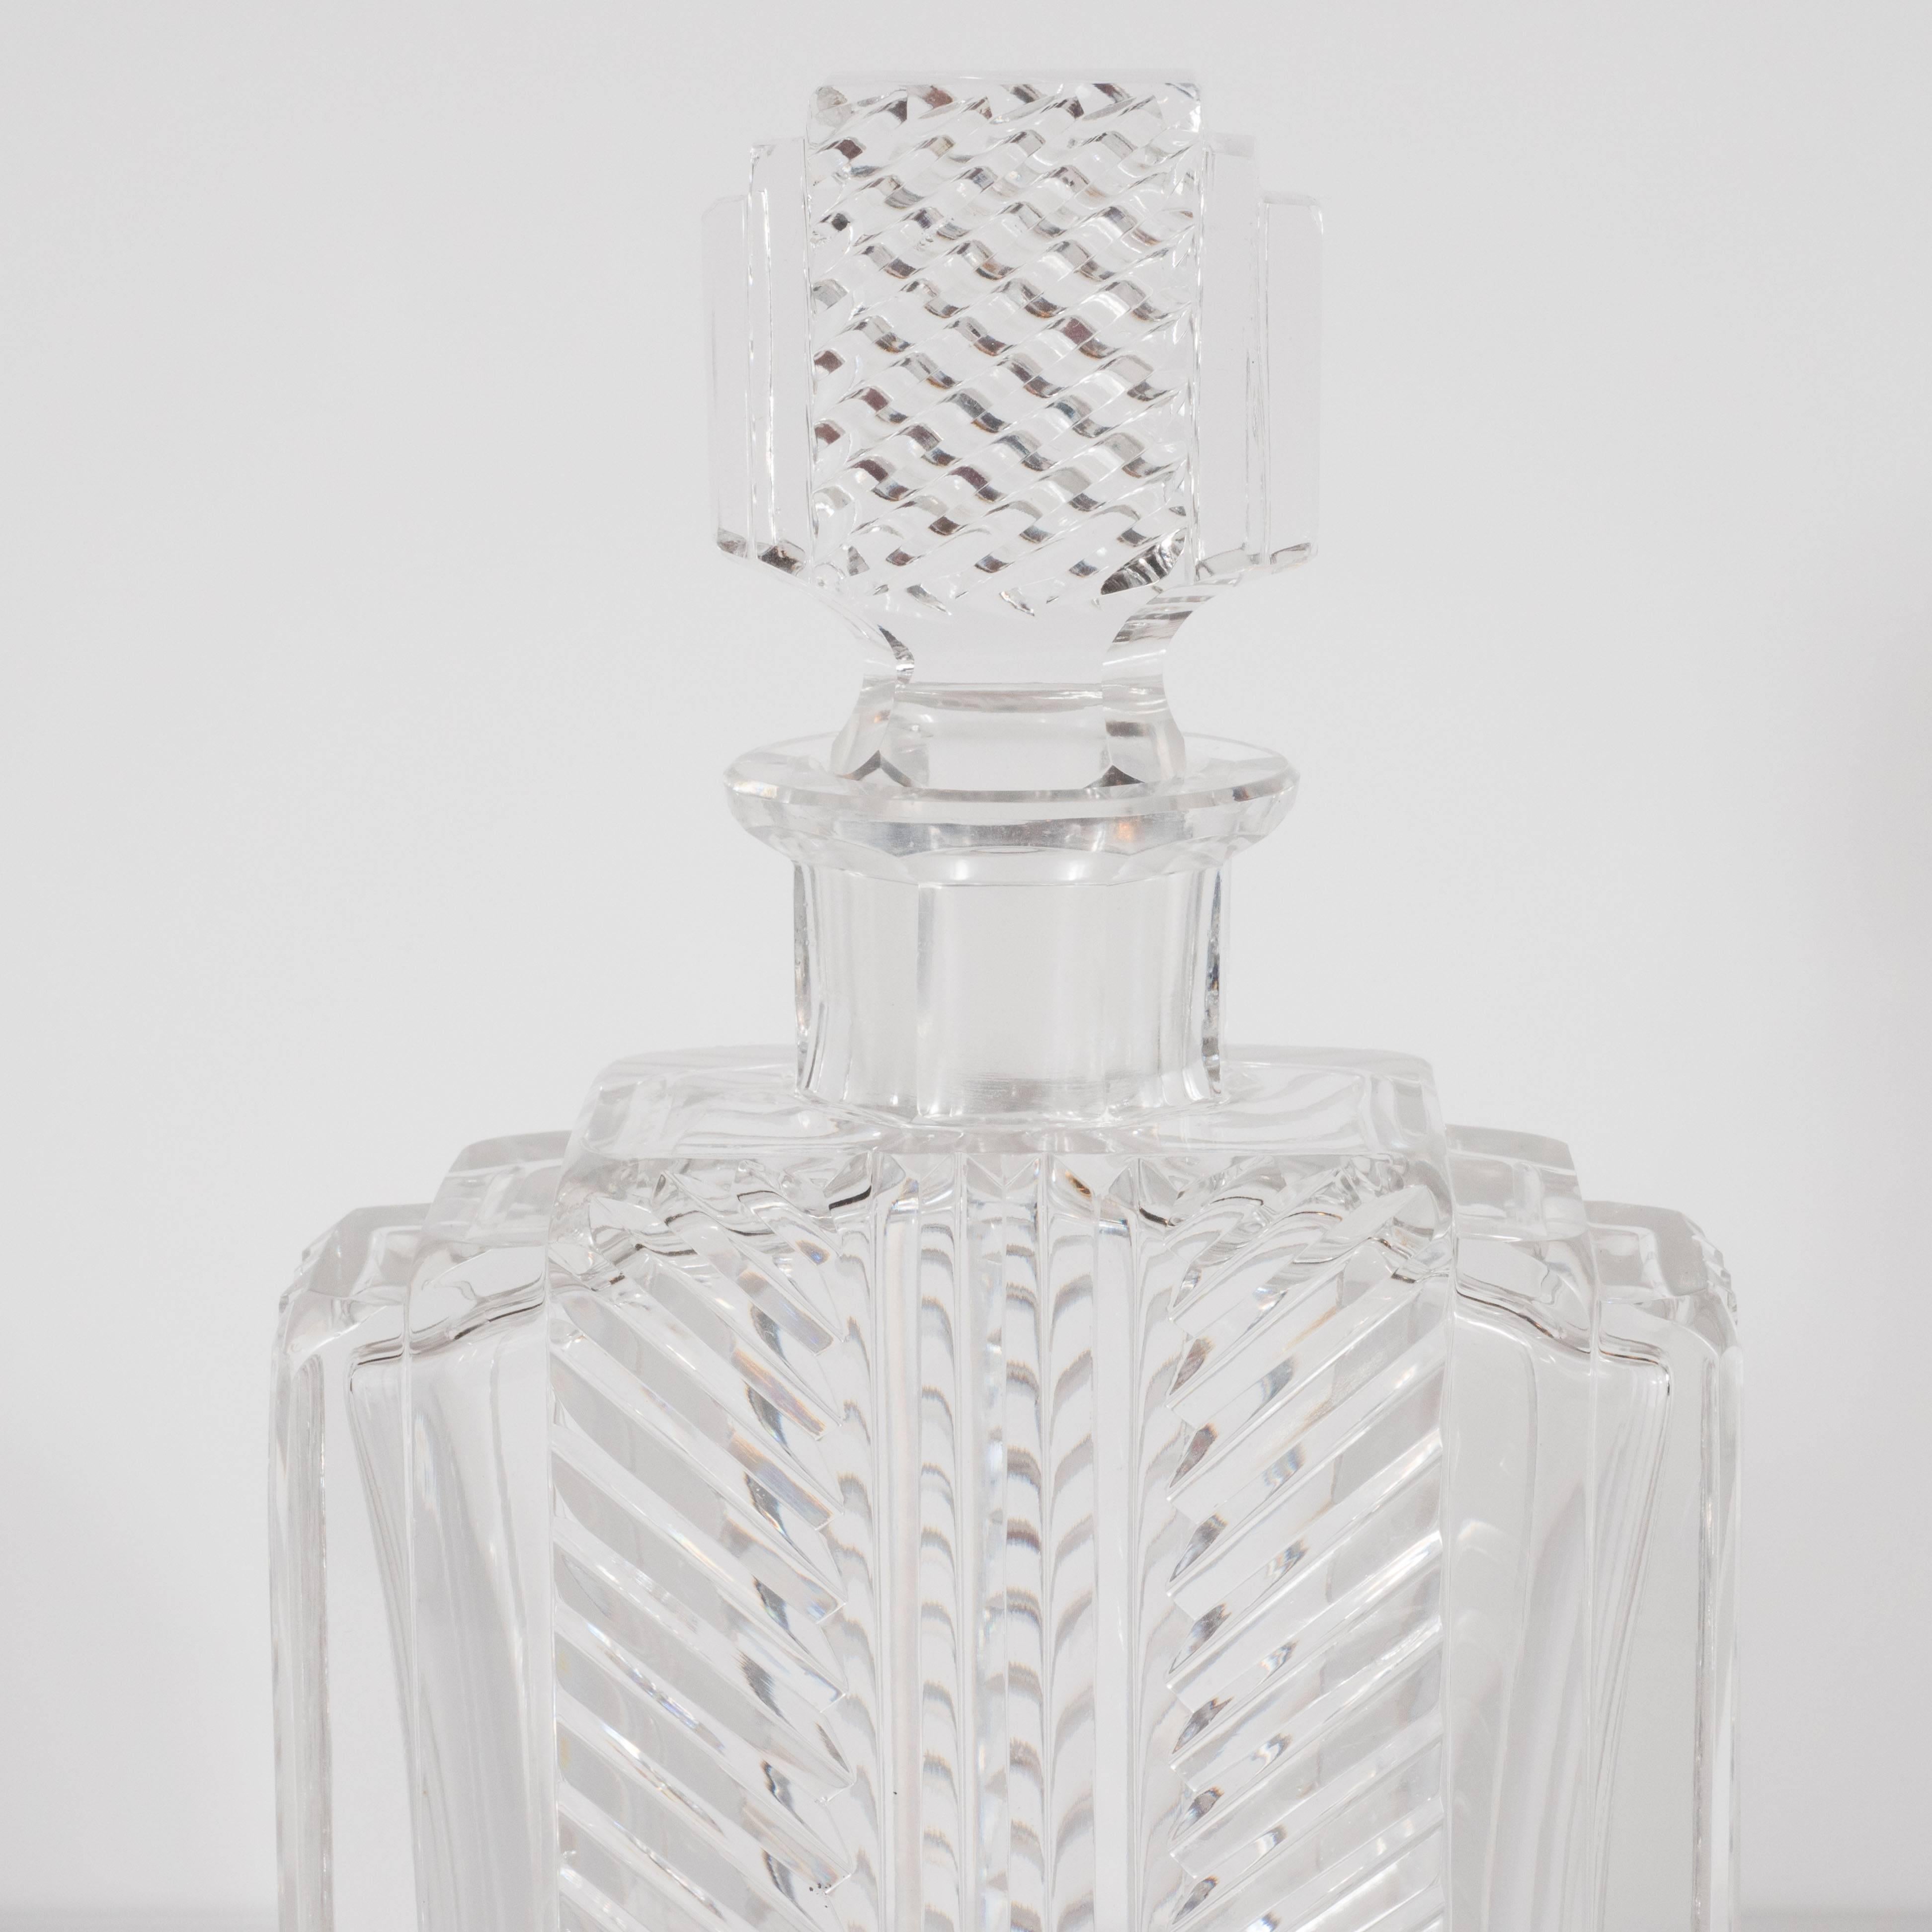 Exquisite Skyscraper Style Crystal Art Deco Hand-Cut & Beveled Crystal Decanter 3